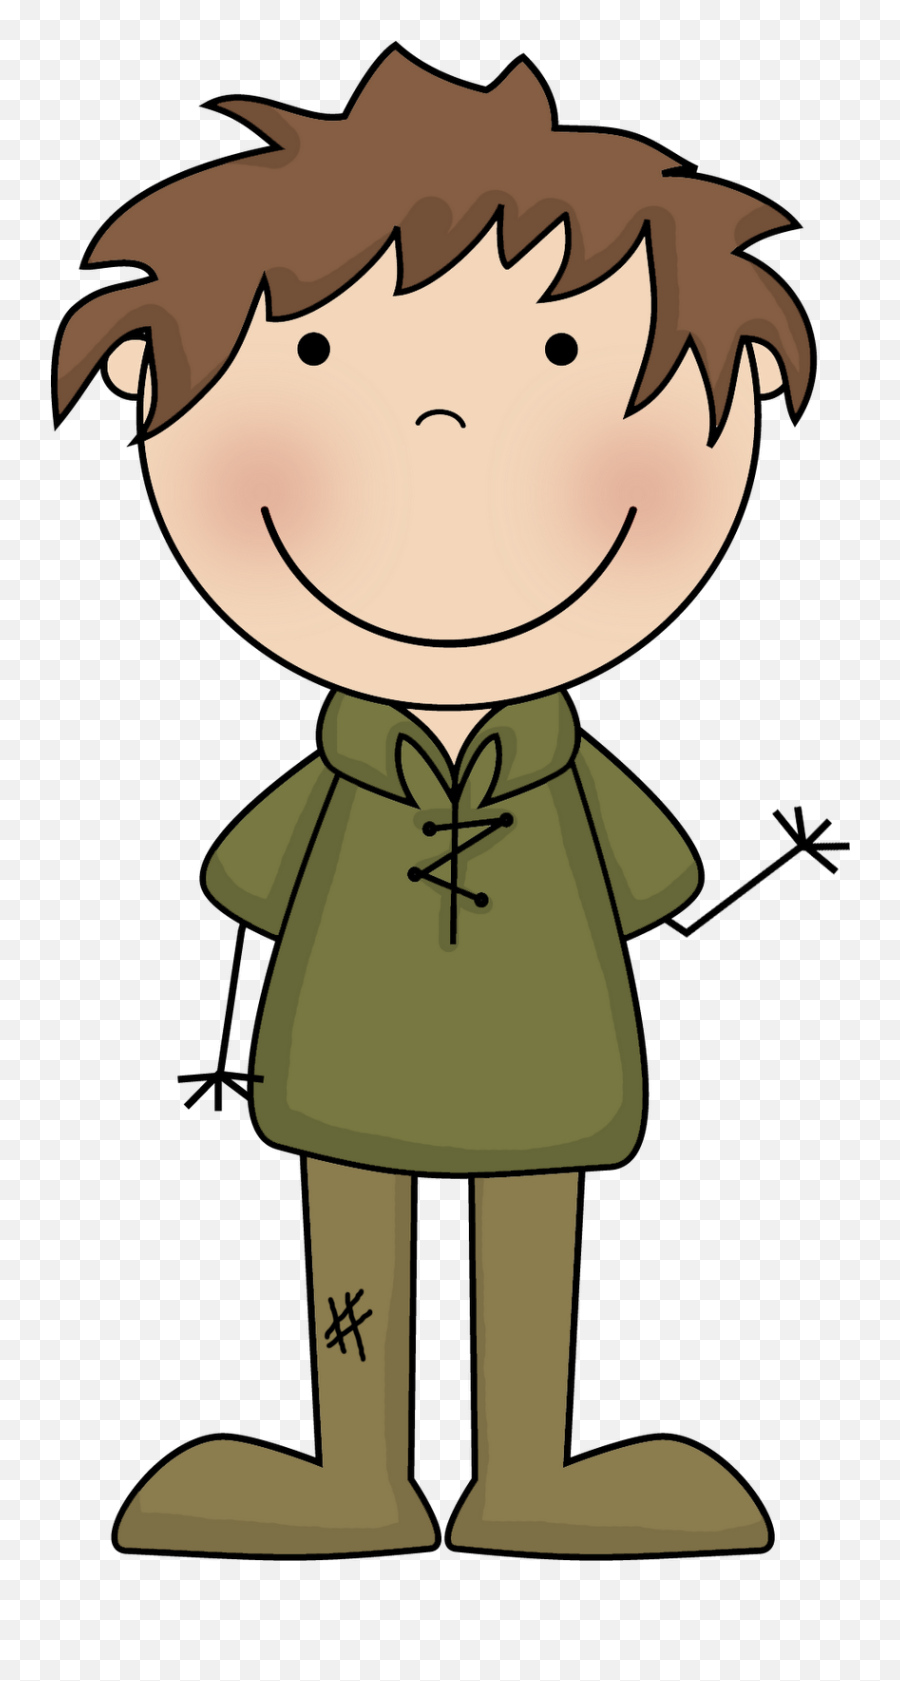 Library Of Jack And The Beanstalk S Poor Mom Free Svg - Jack And Beanstalk Character Png,Jack Jack Png